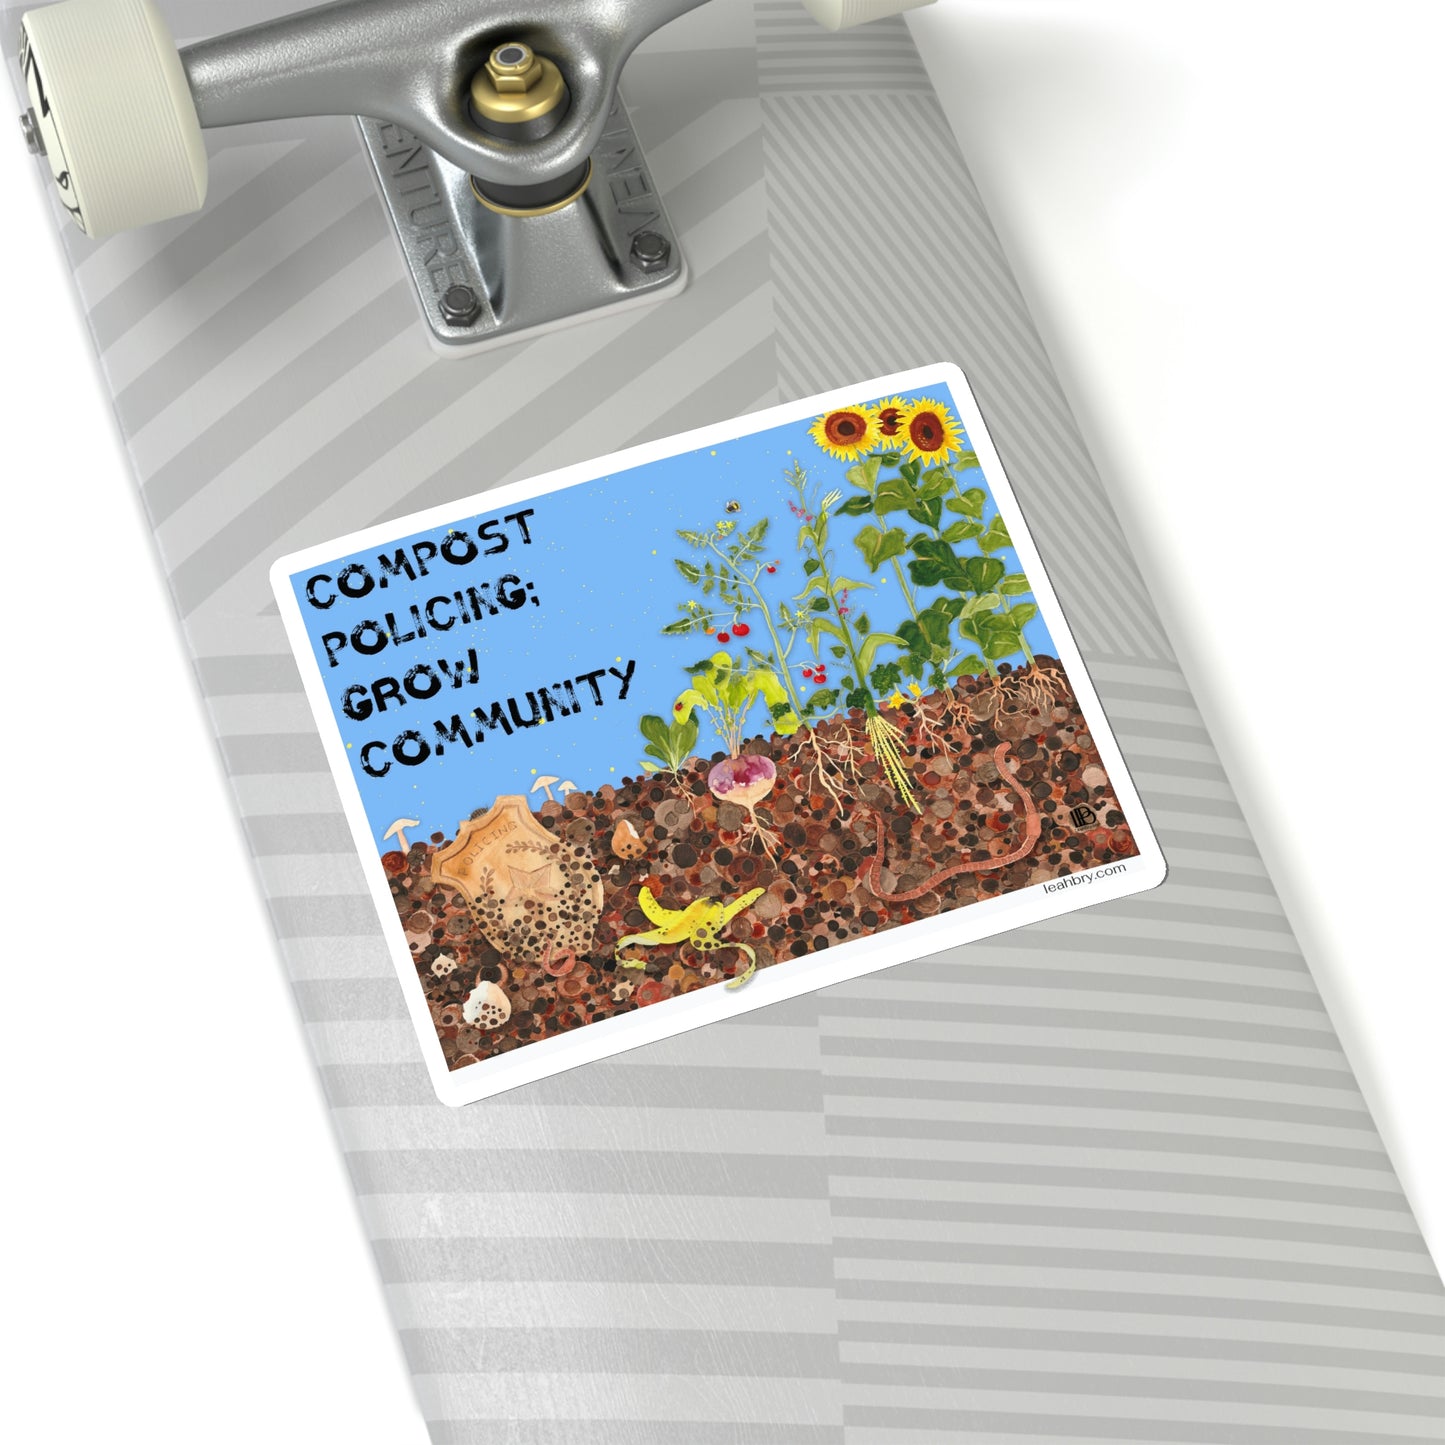 Compost Policing; Grow Community Sticker